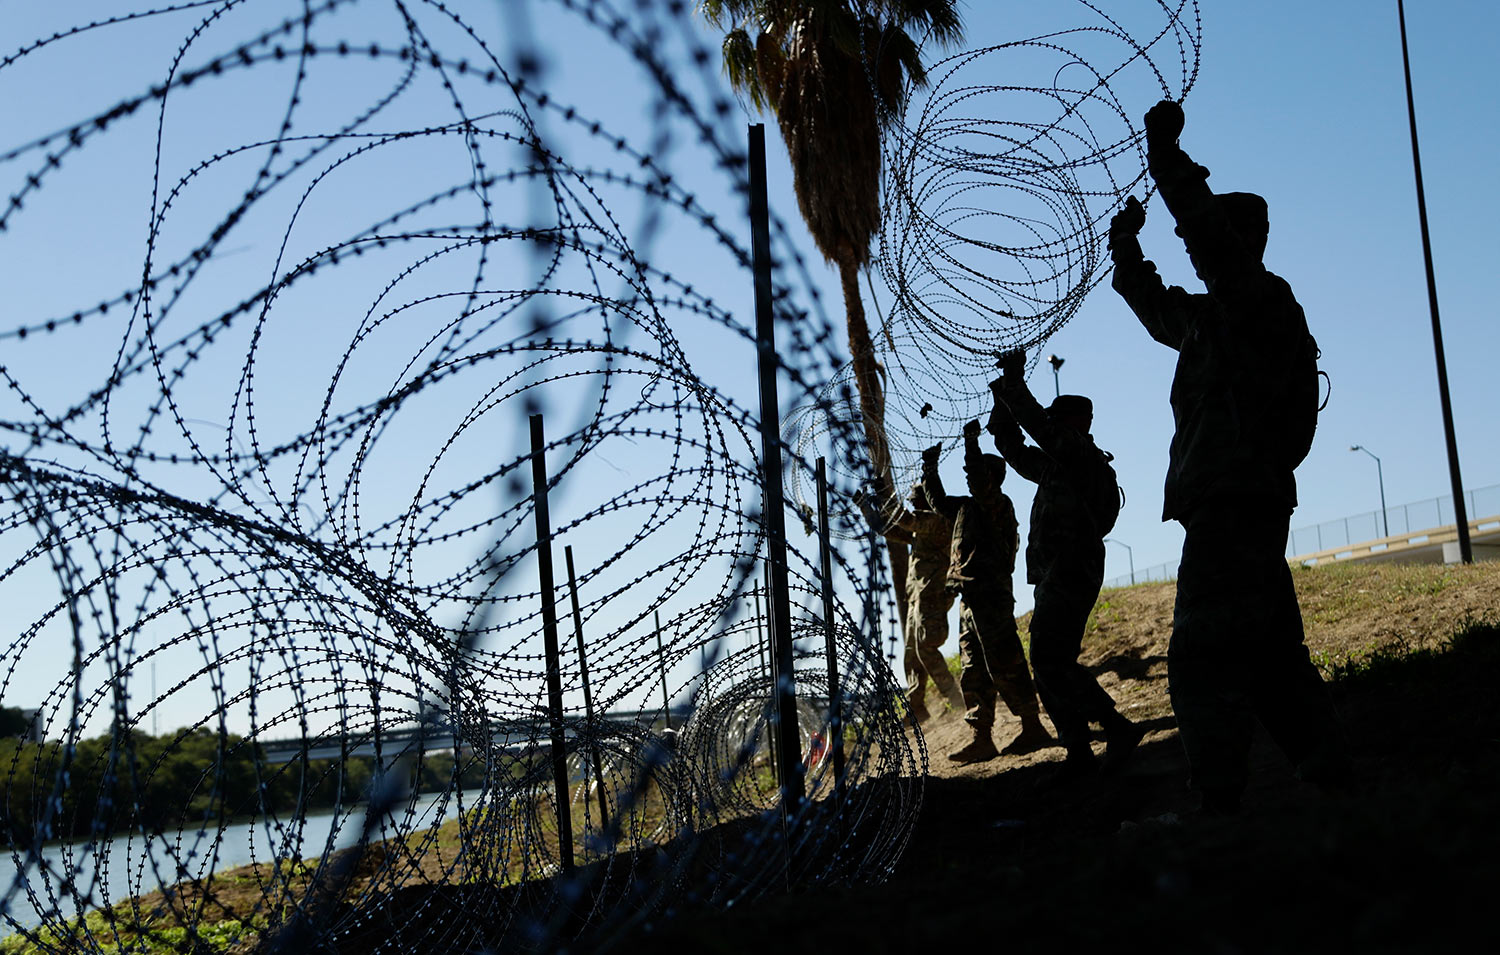  Members of the U.S. military install multiple tiers of concertina wire along the banks of the Rio Grande near the Juarez-Lincoln Bridge at the U.S.-Mexico border, Friday, Nov. 16, 2018, in Laredo, Texas. (AP Photo/Eric Gay) 